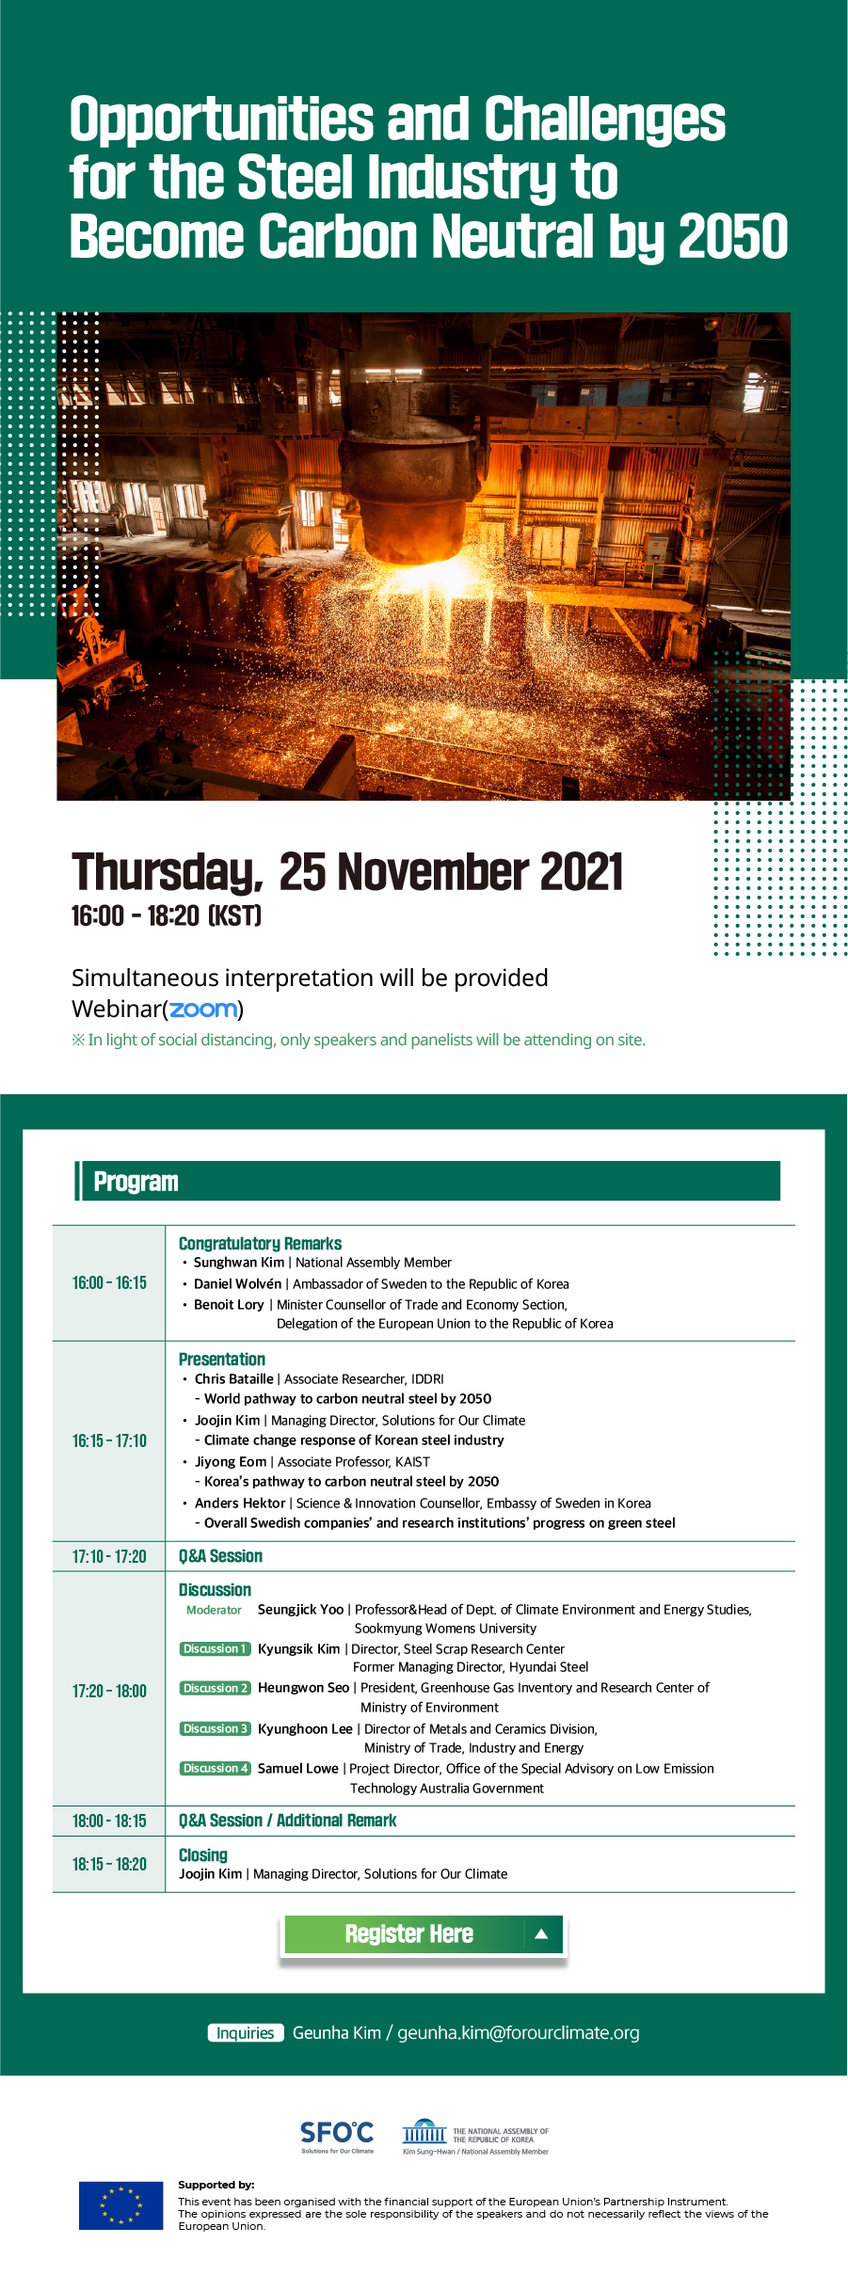 [Webinar] Opportunities and Challenges for the Steel Industry to become carbon neutral by 2050